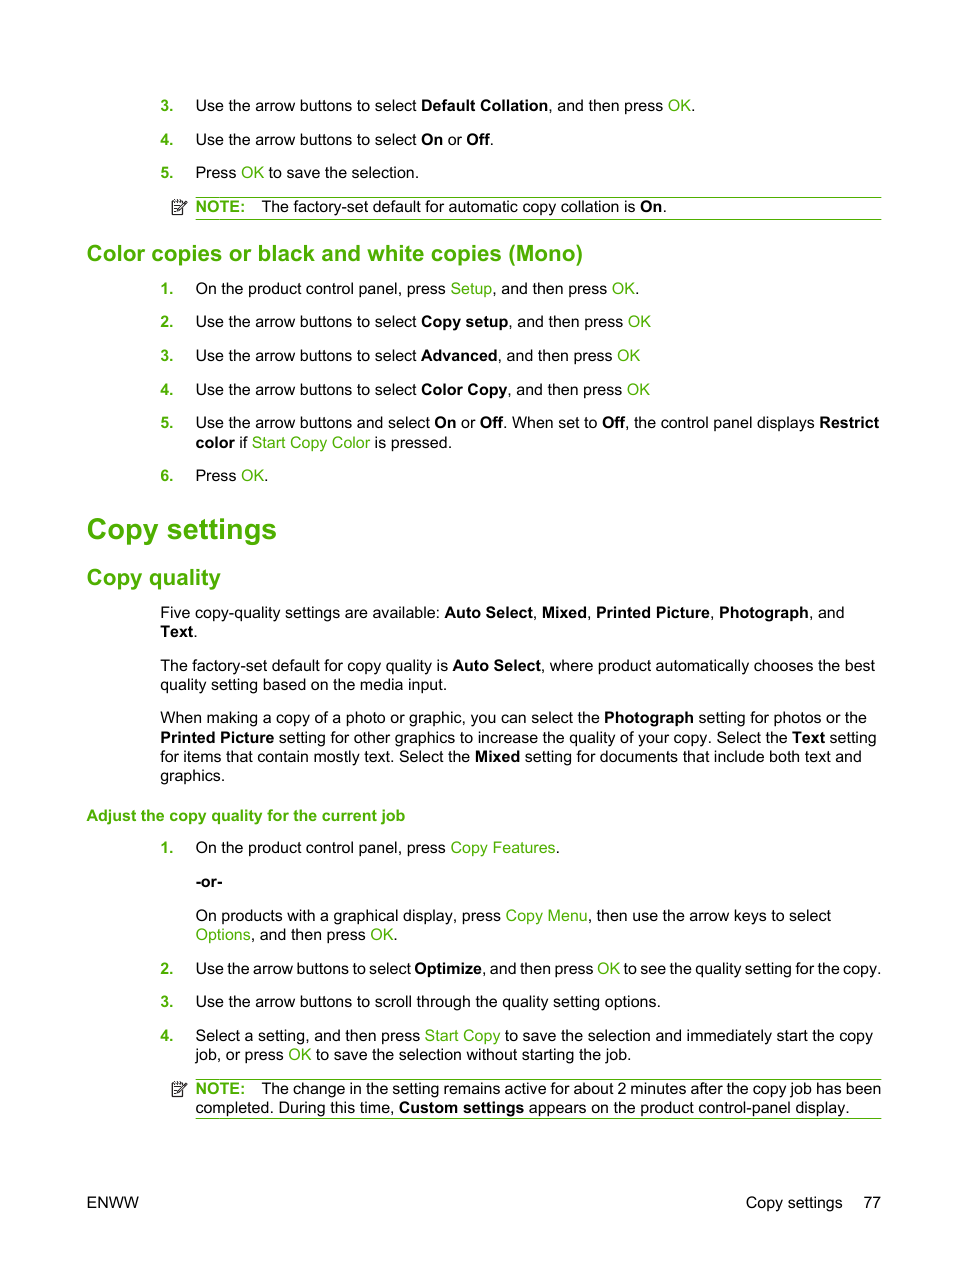 Color copies or black and white copies (mono), Copy settings, Copy quality | HP CM1312 MFP Series User Manual | Page 89 / 276